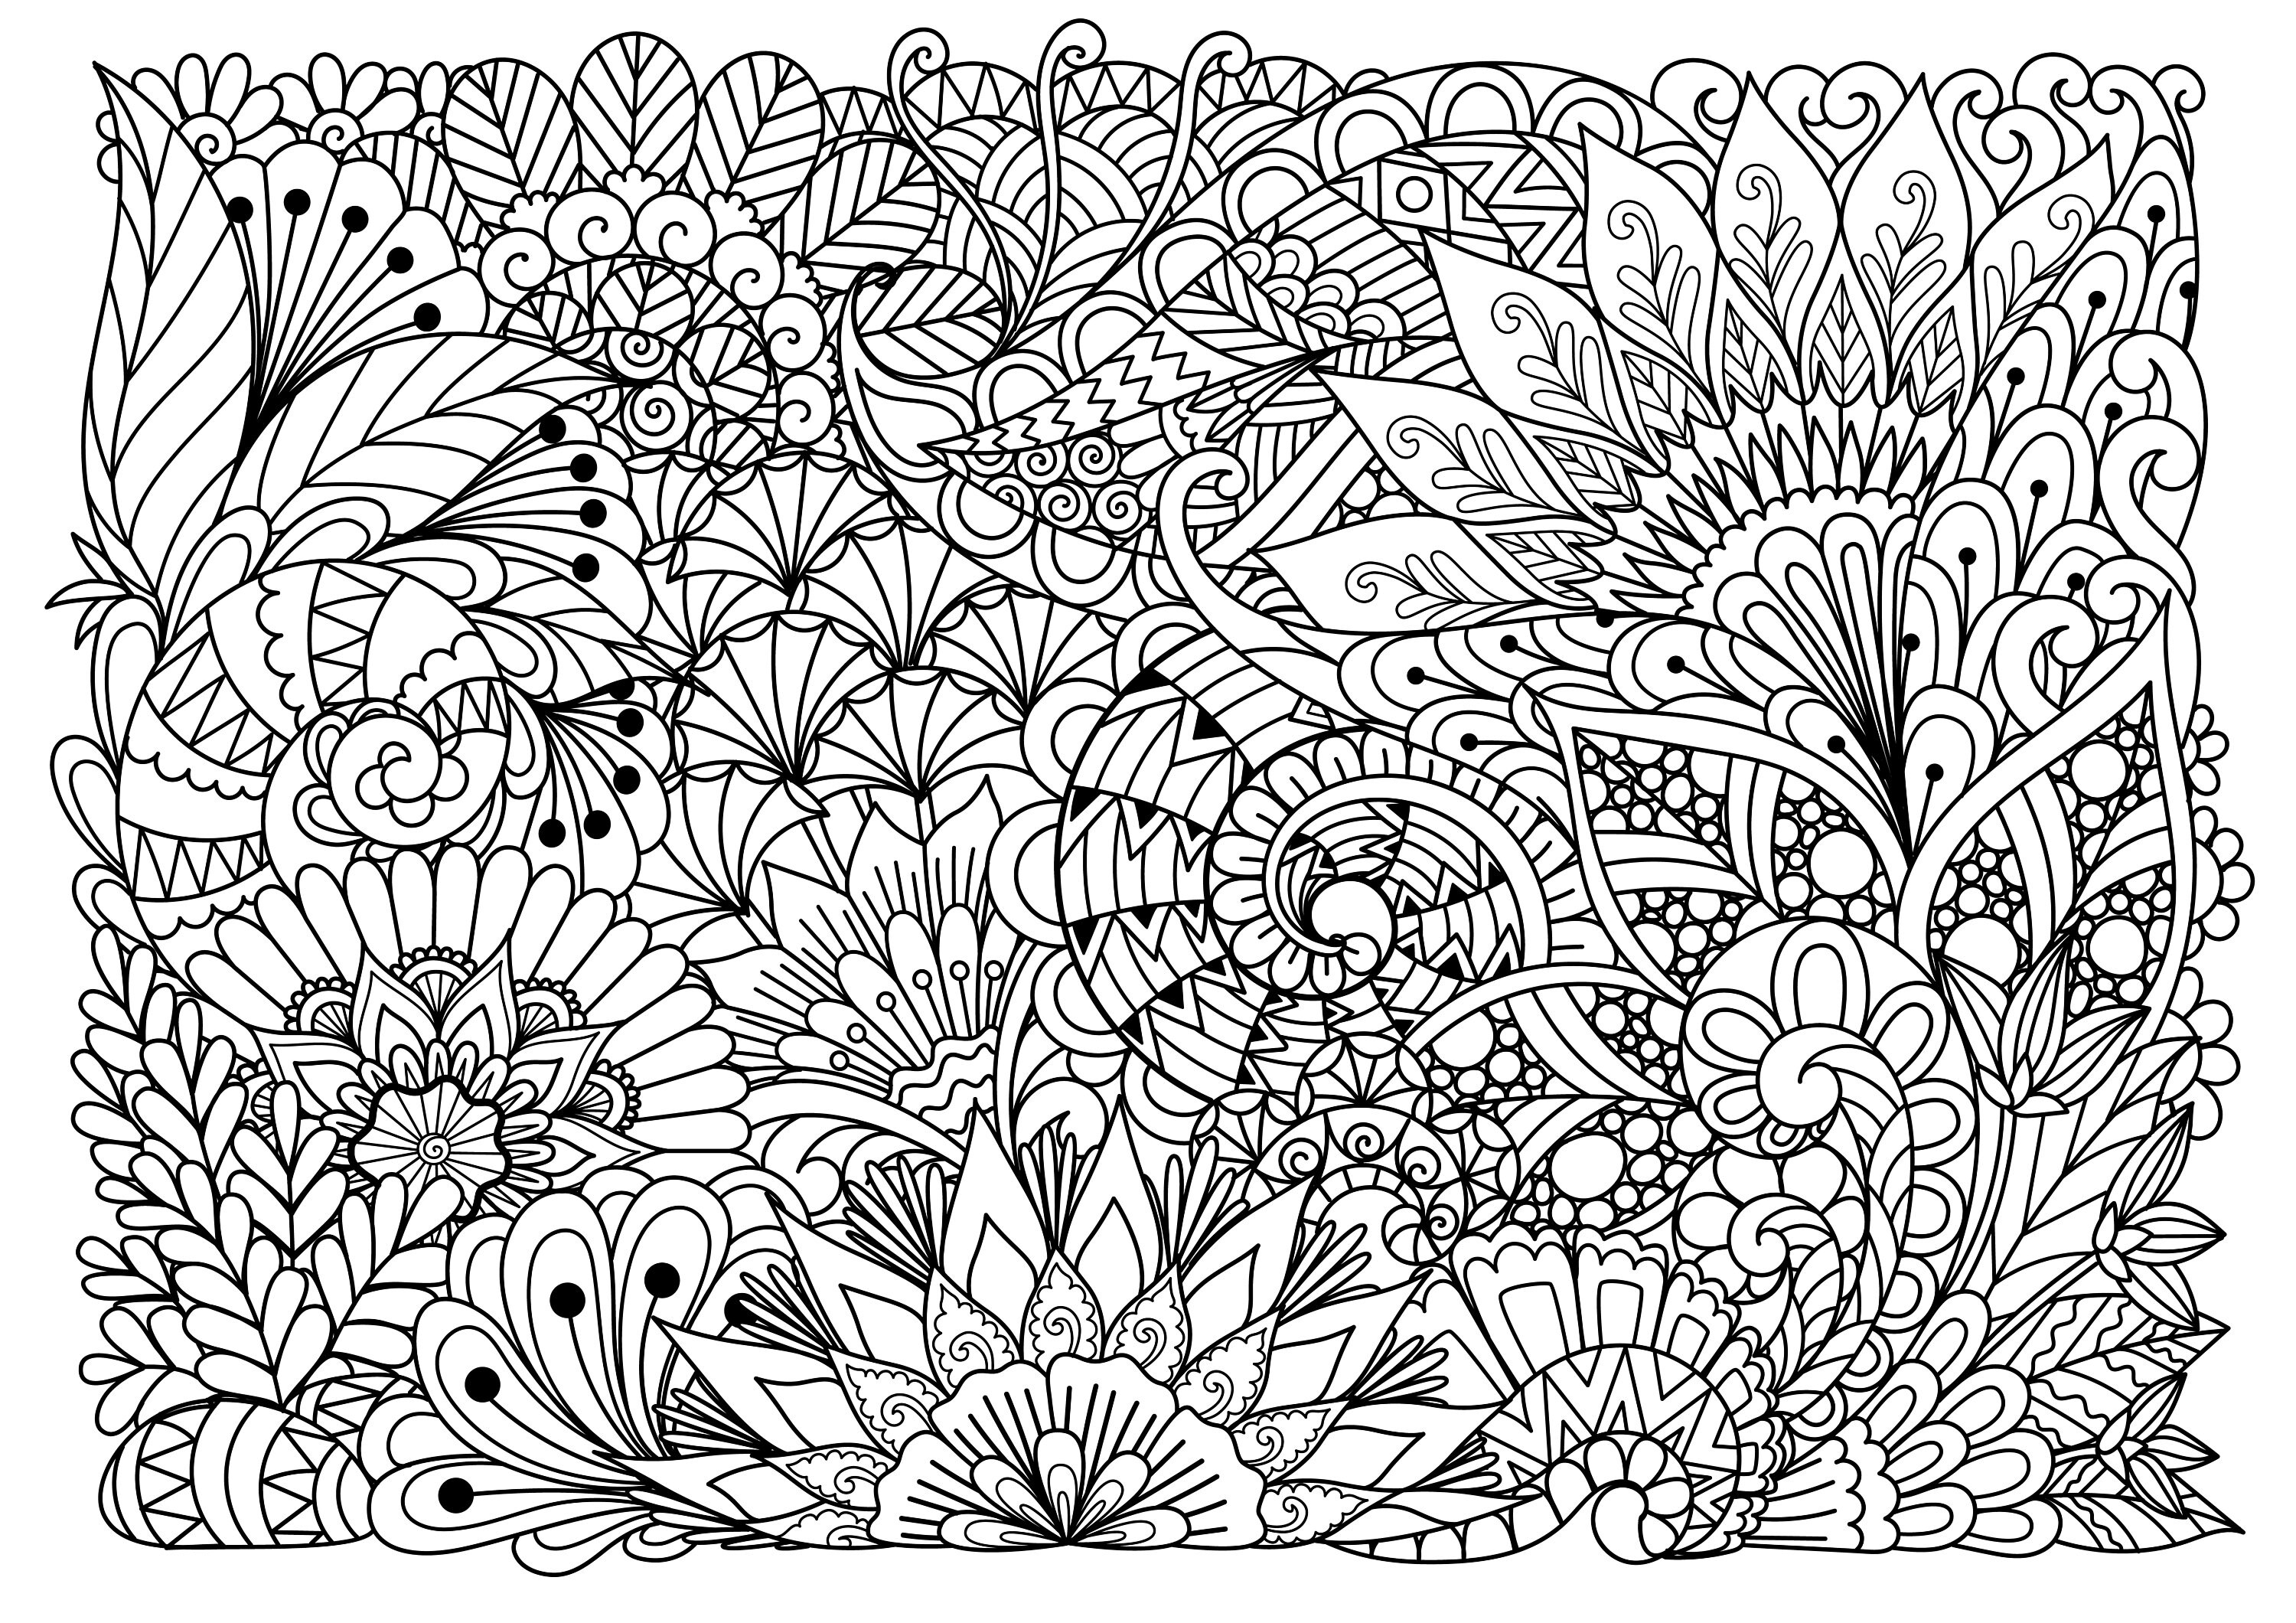 Adult Coloring Books: Mandalas: Coloring Books for Adults Featuring 50  Beautiful Mandala, Lace and Doodle Patterns by Hobby Habitat Coloring Books,  Paperback